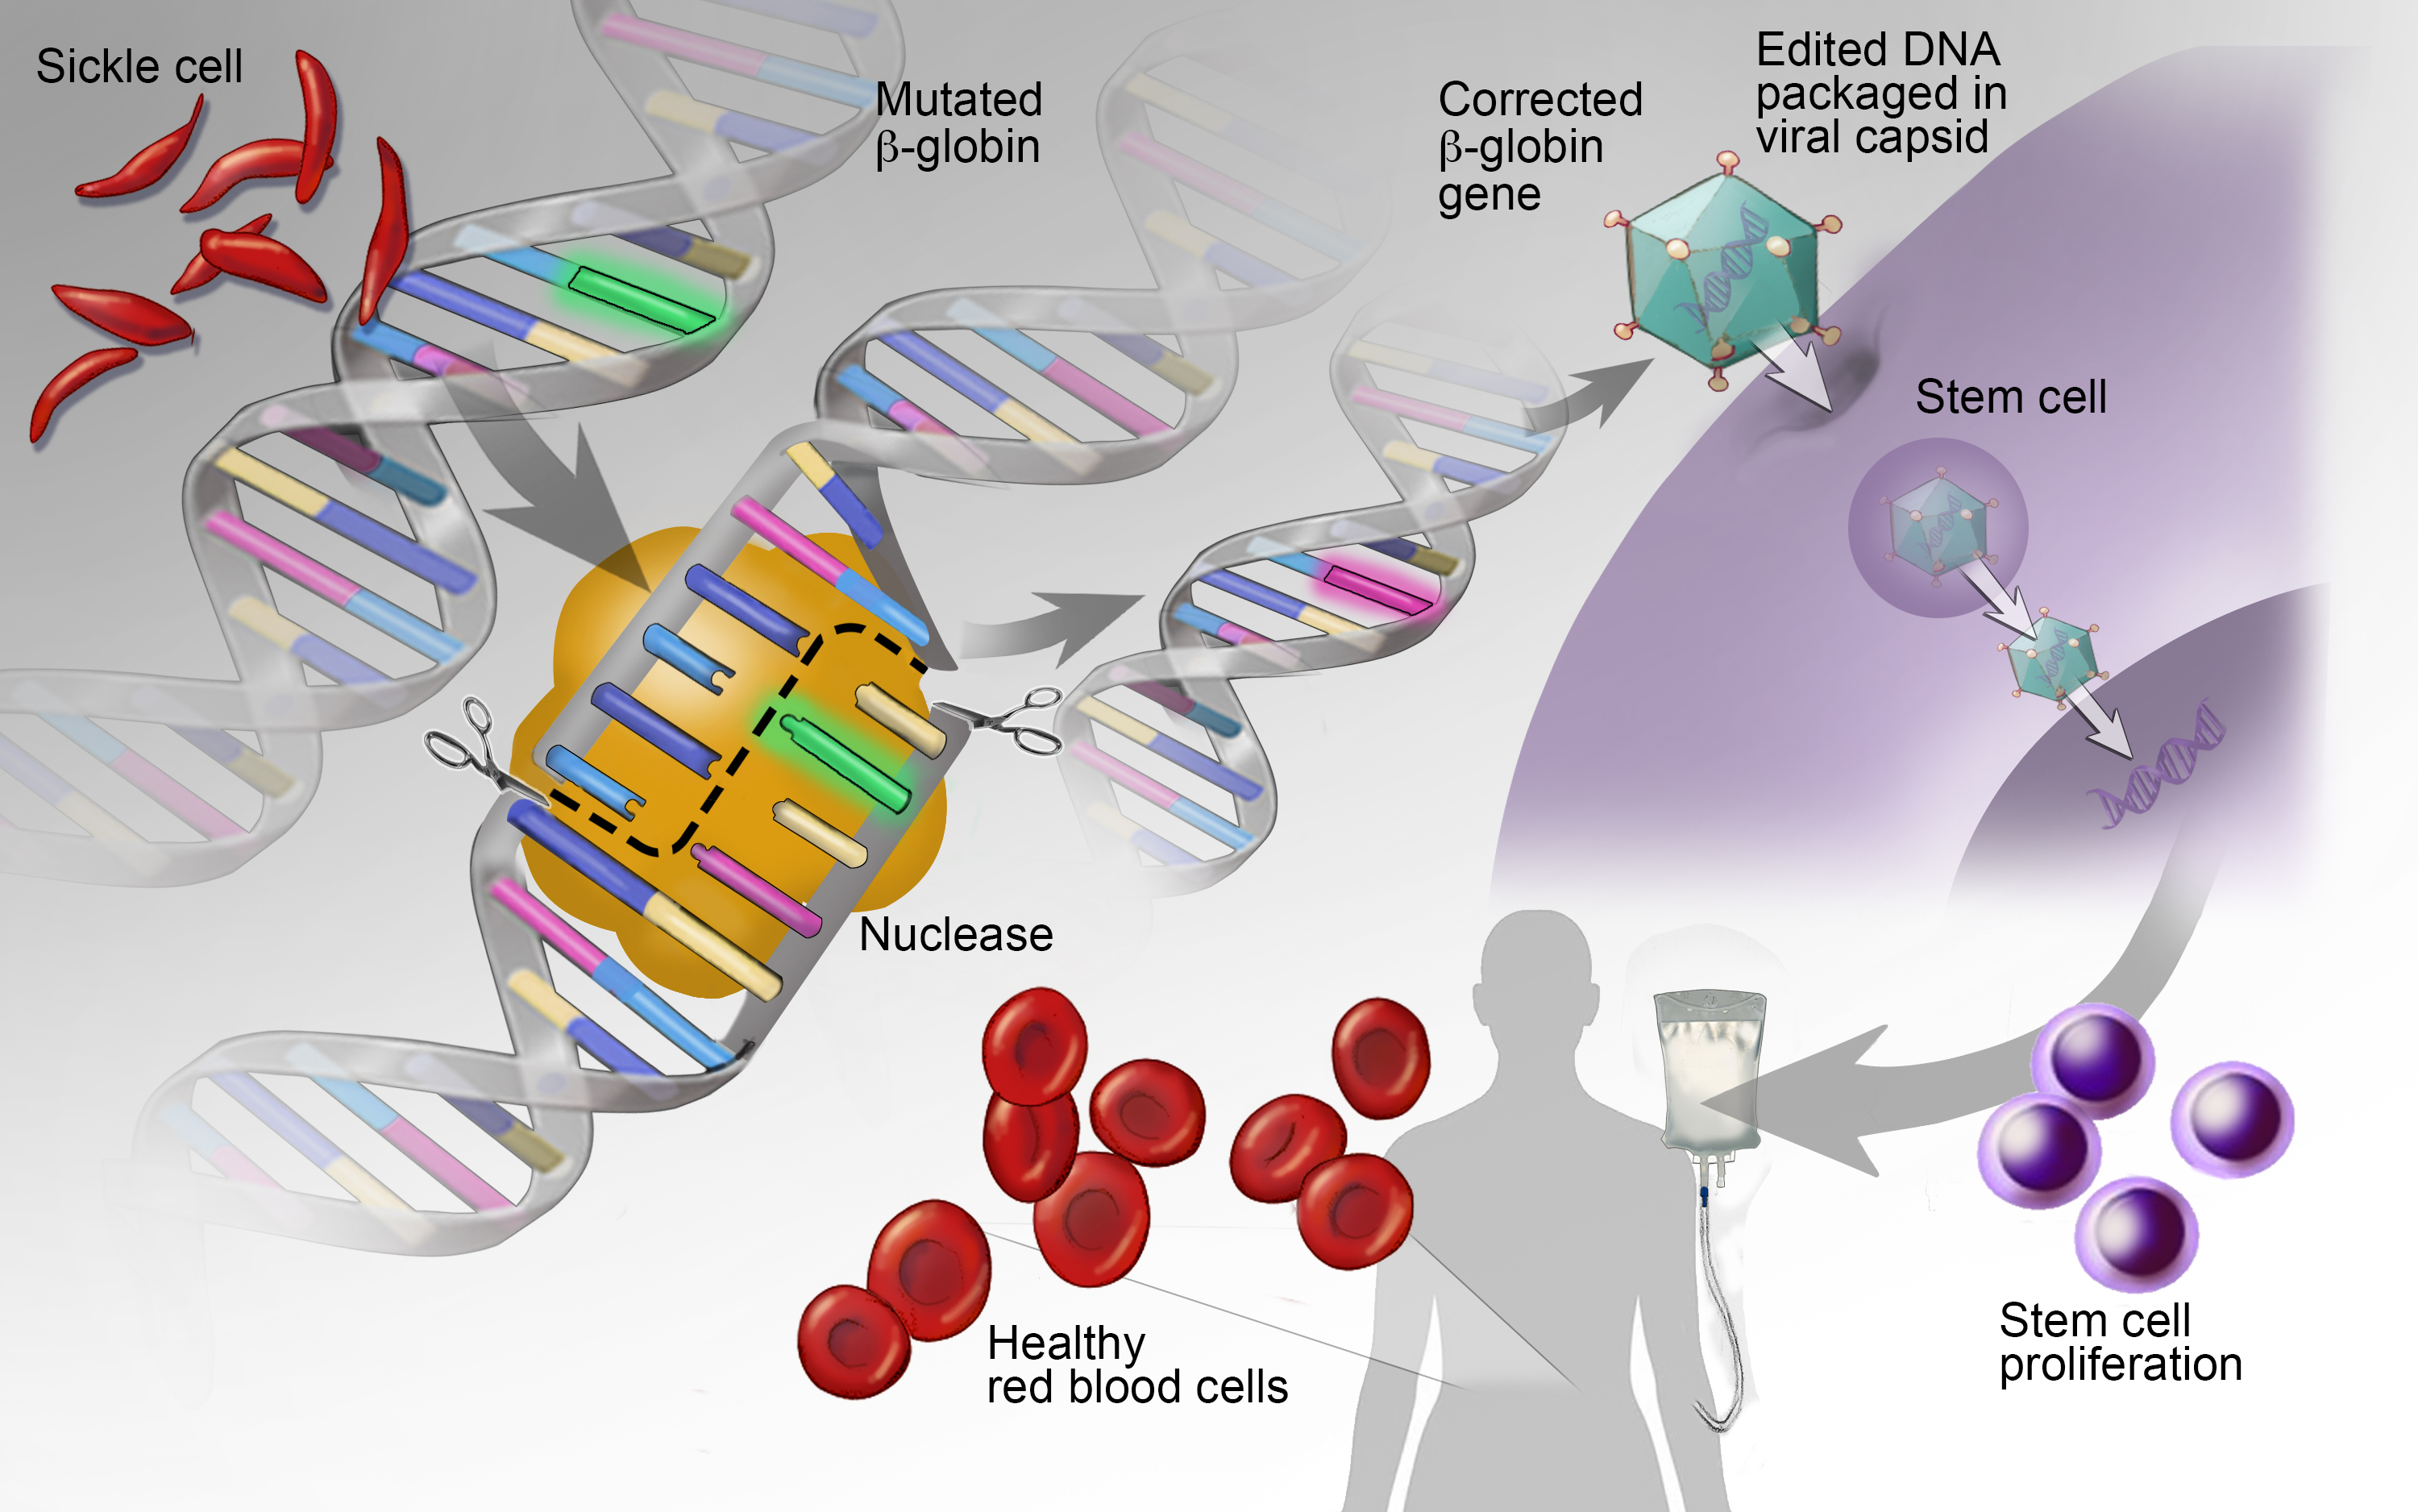 case study about gene therapy